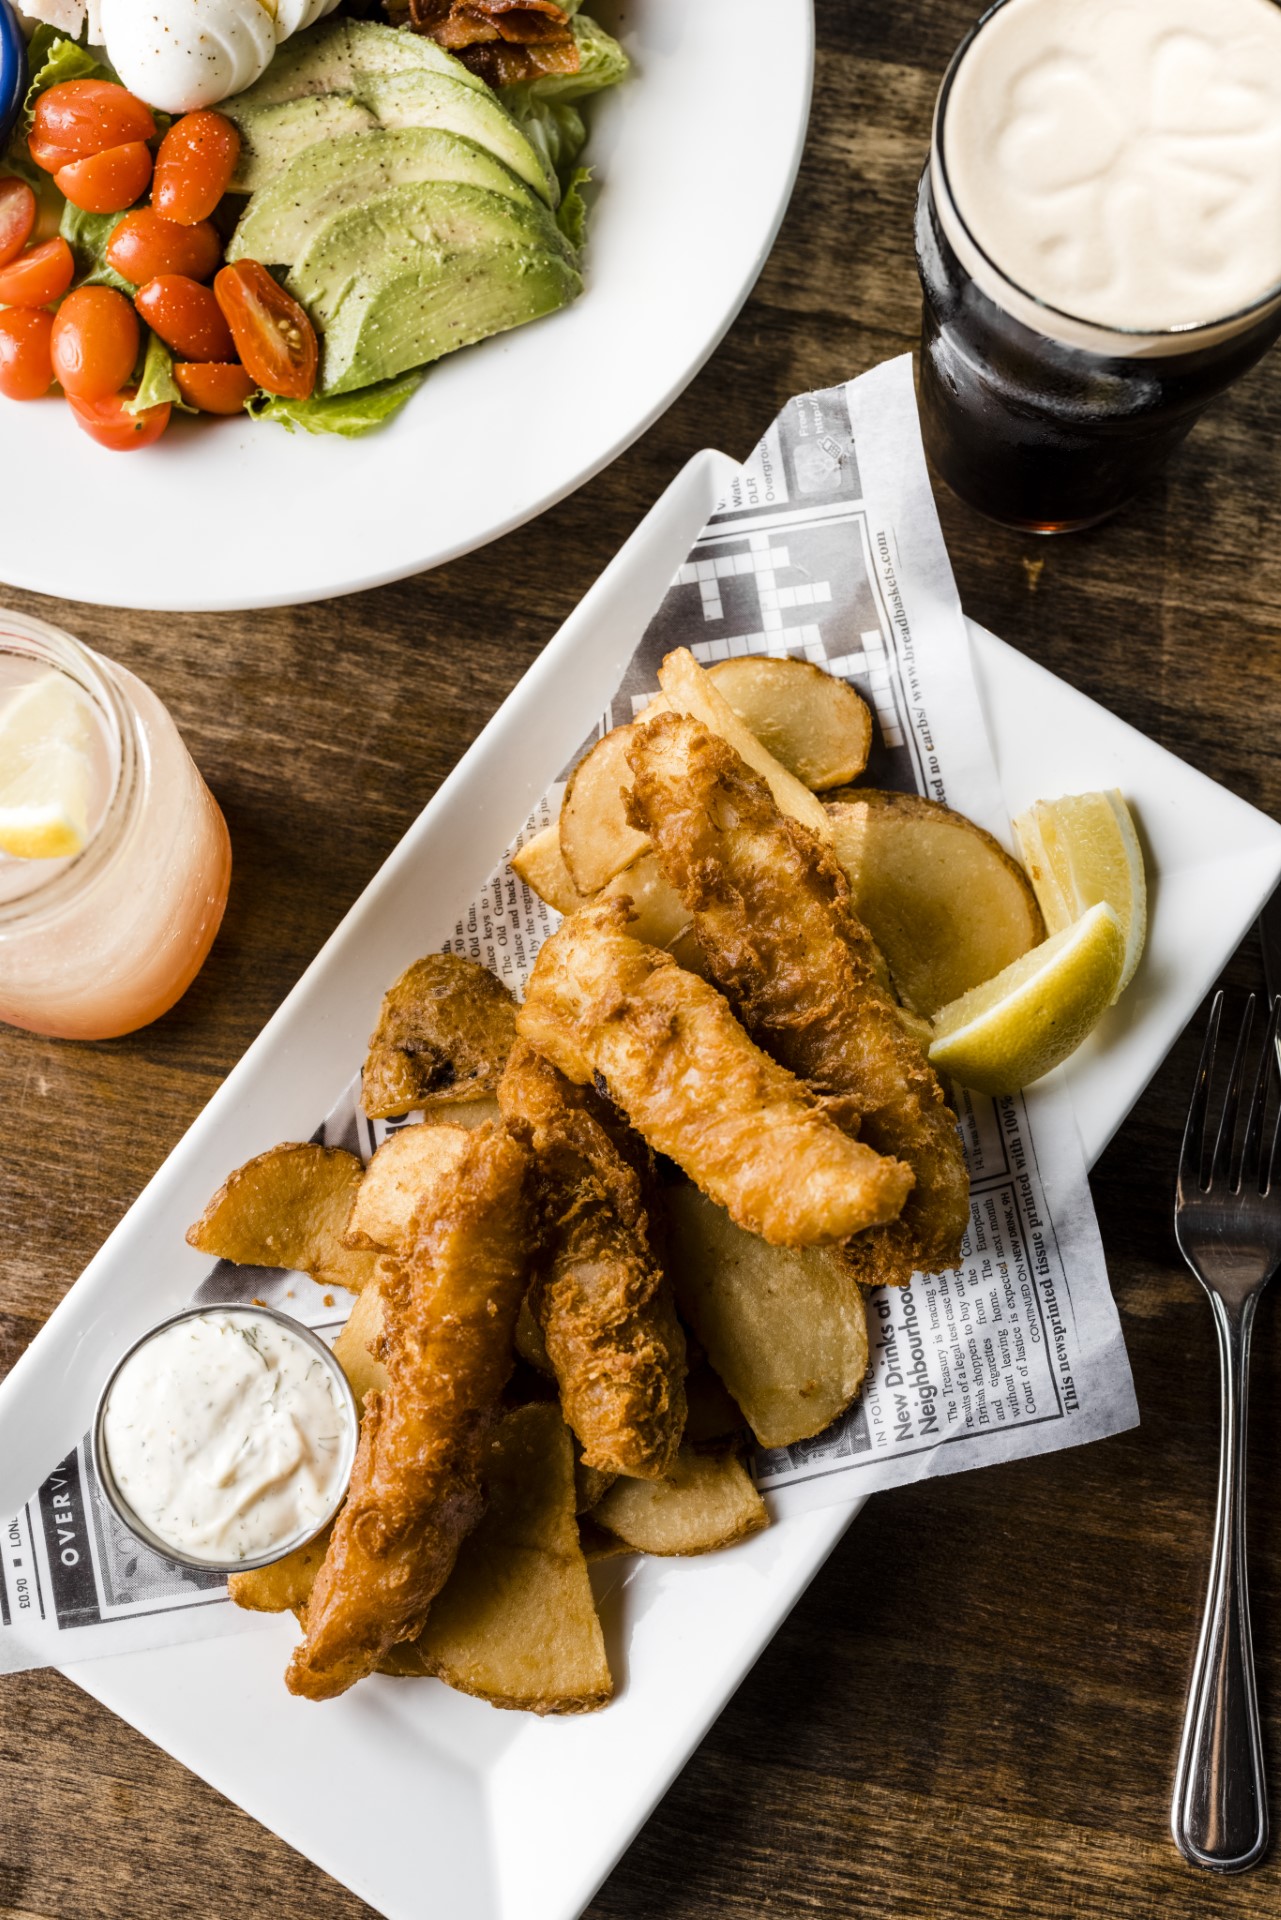 Fox & Goose Public House | Fish & Chips British Specialty from lunch menu